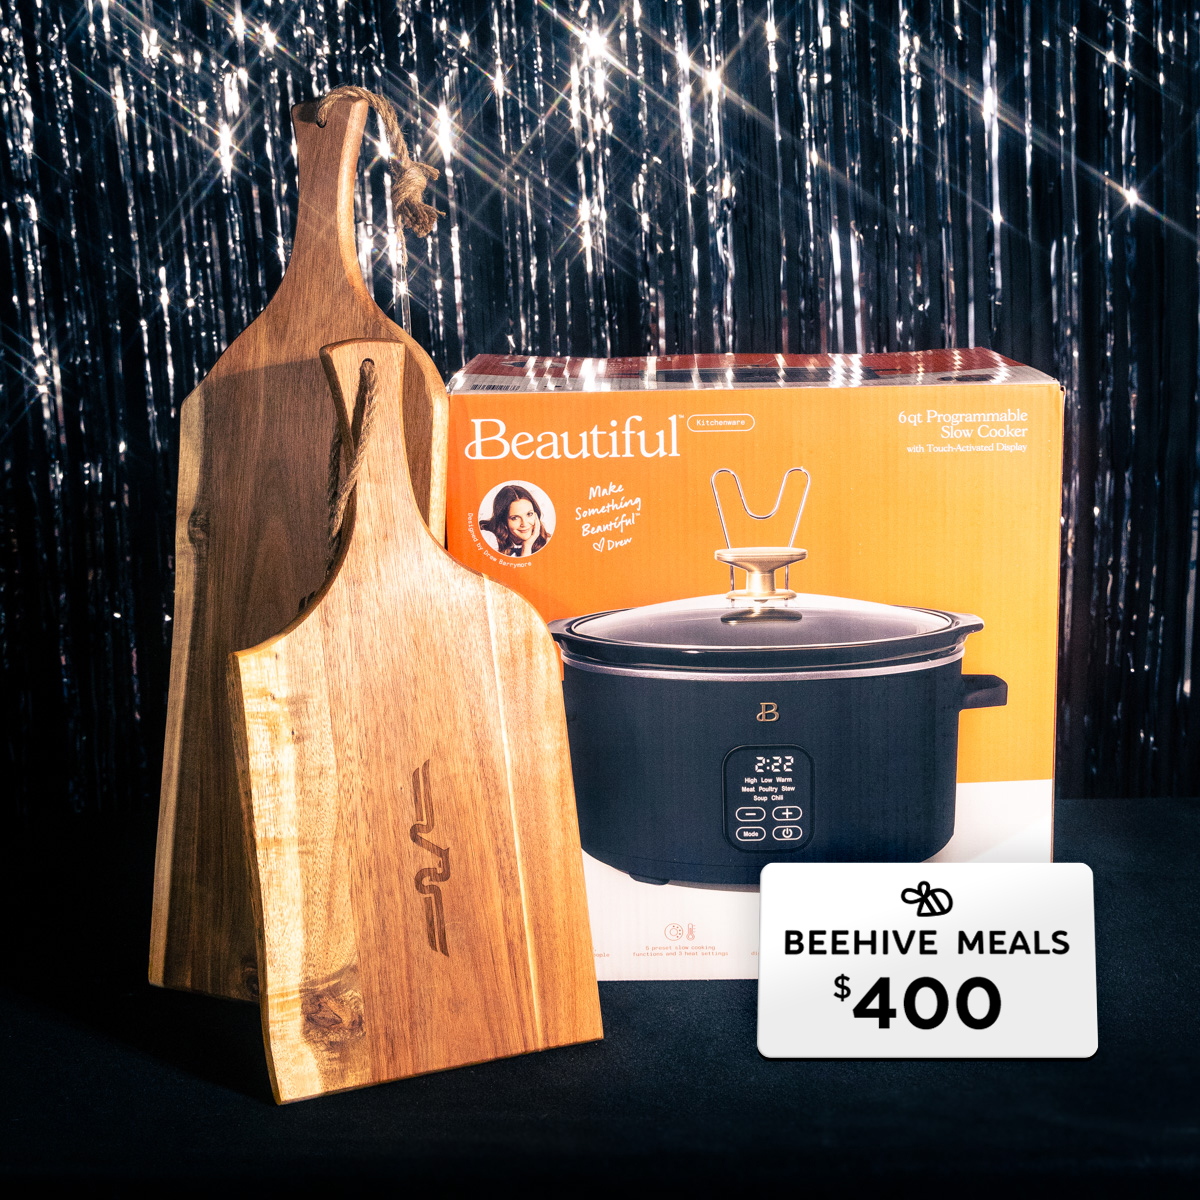 America First CU on X: Day 10/12 Today you could win 🎅$400 Beehive meals  gift card 🎅Crockpot 🎅Wooden Cutting Boards To Enter: 🪩Follow us!  🪩Retweet 🪩Bookmark Giveaway Ends Friday 12/15.  /